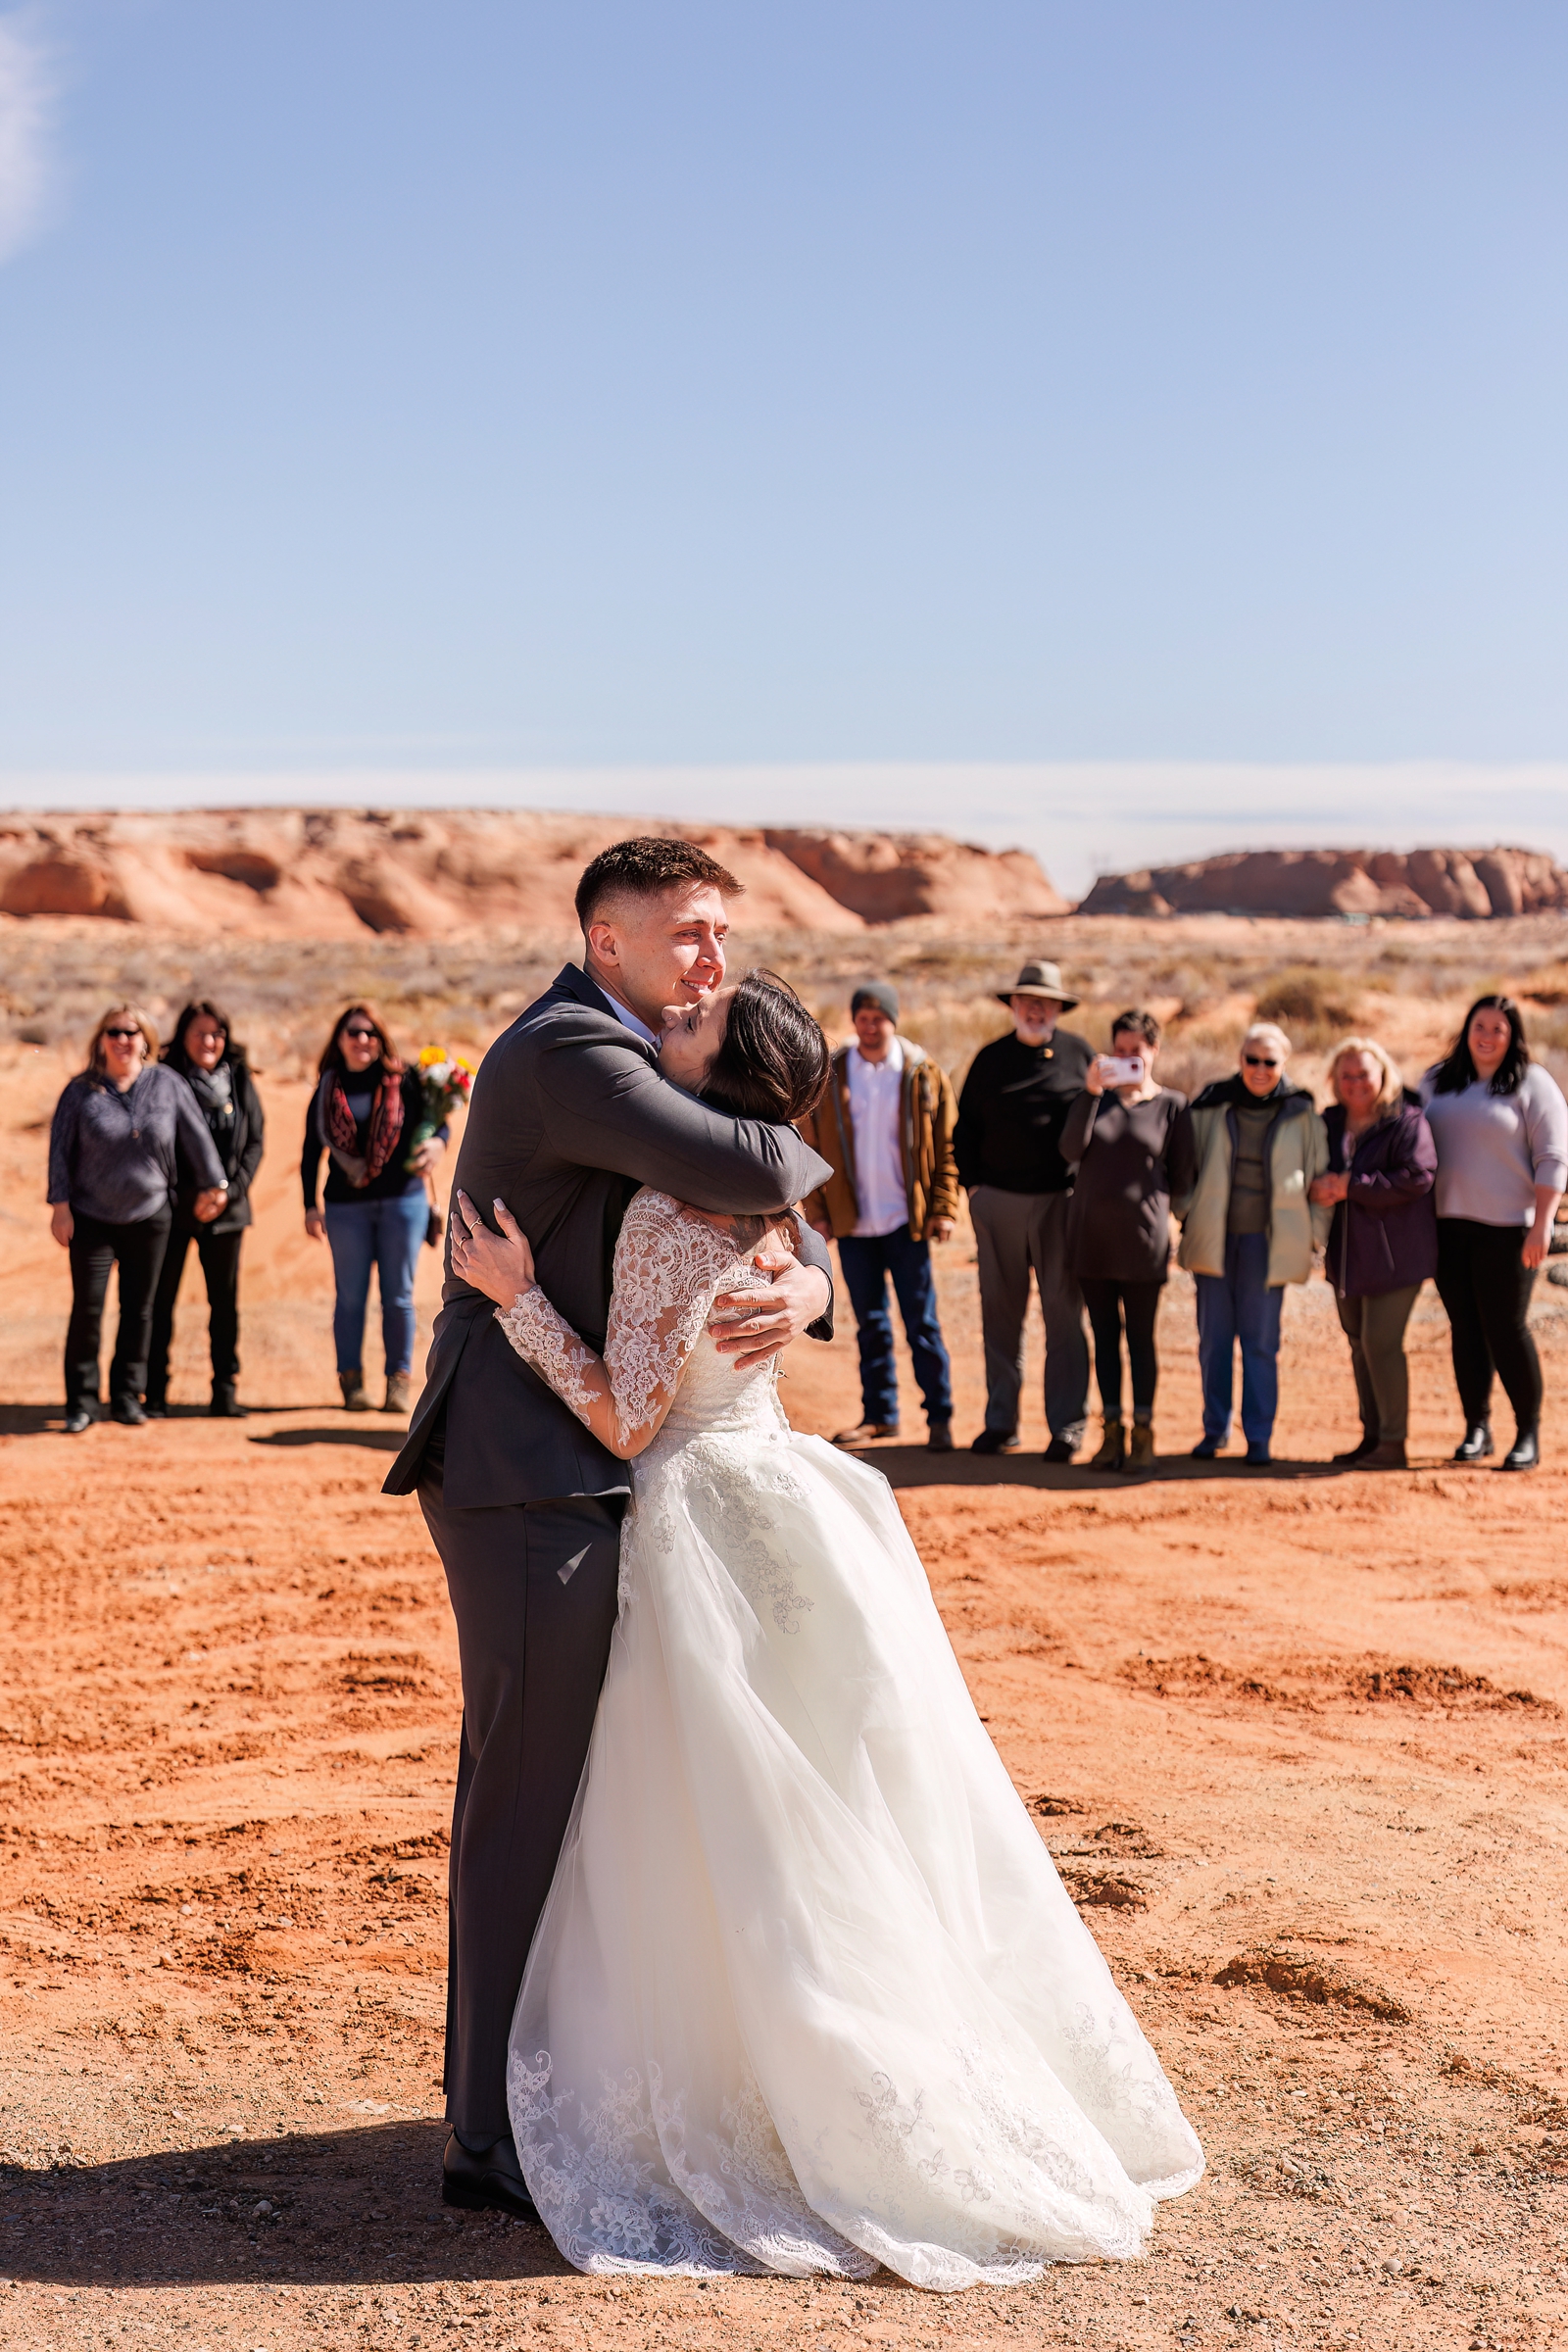 The happy couple embrace before their wonderful elopement in Arizona